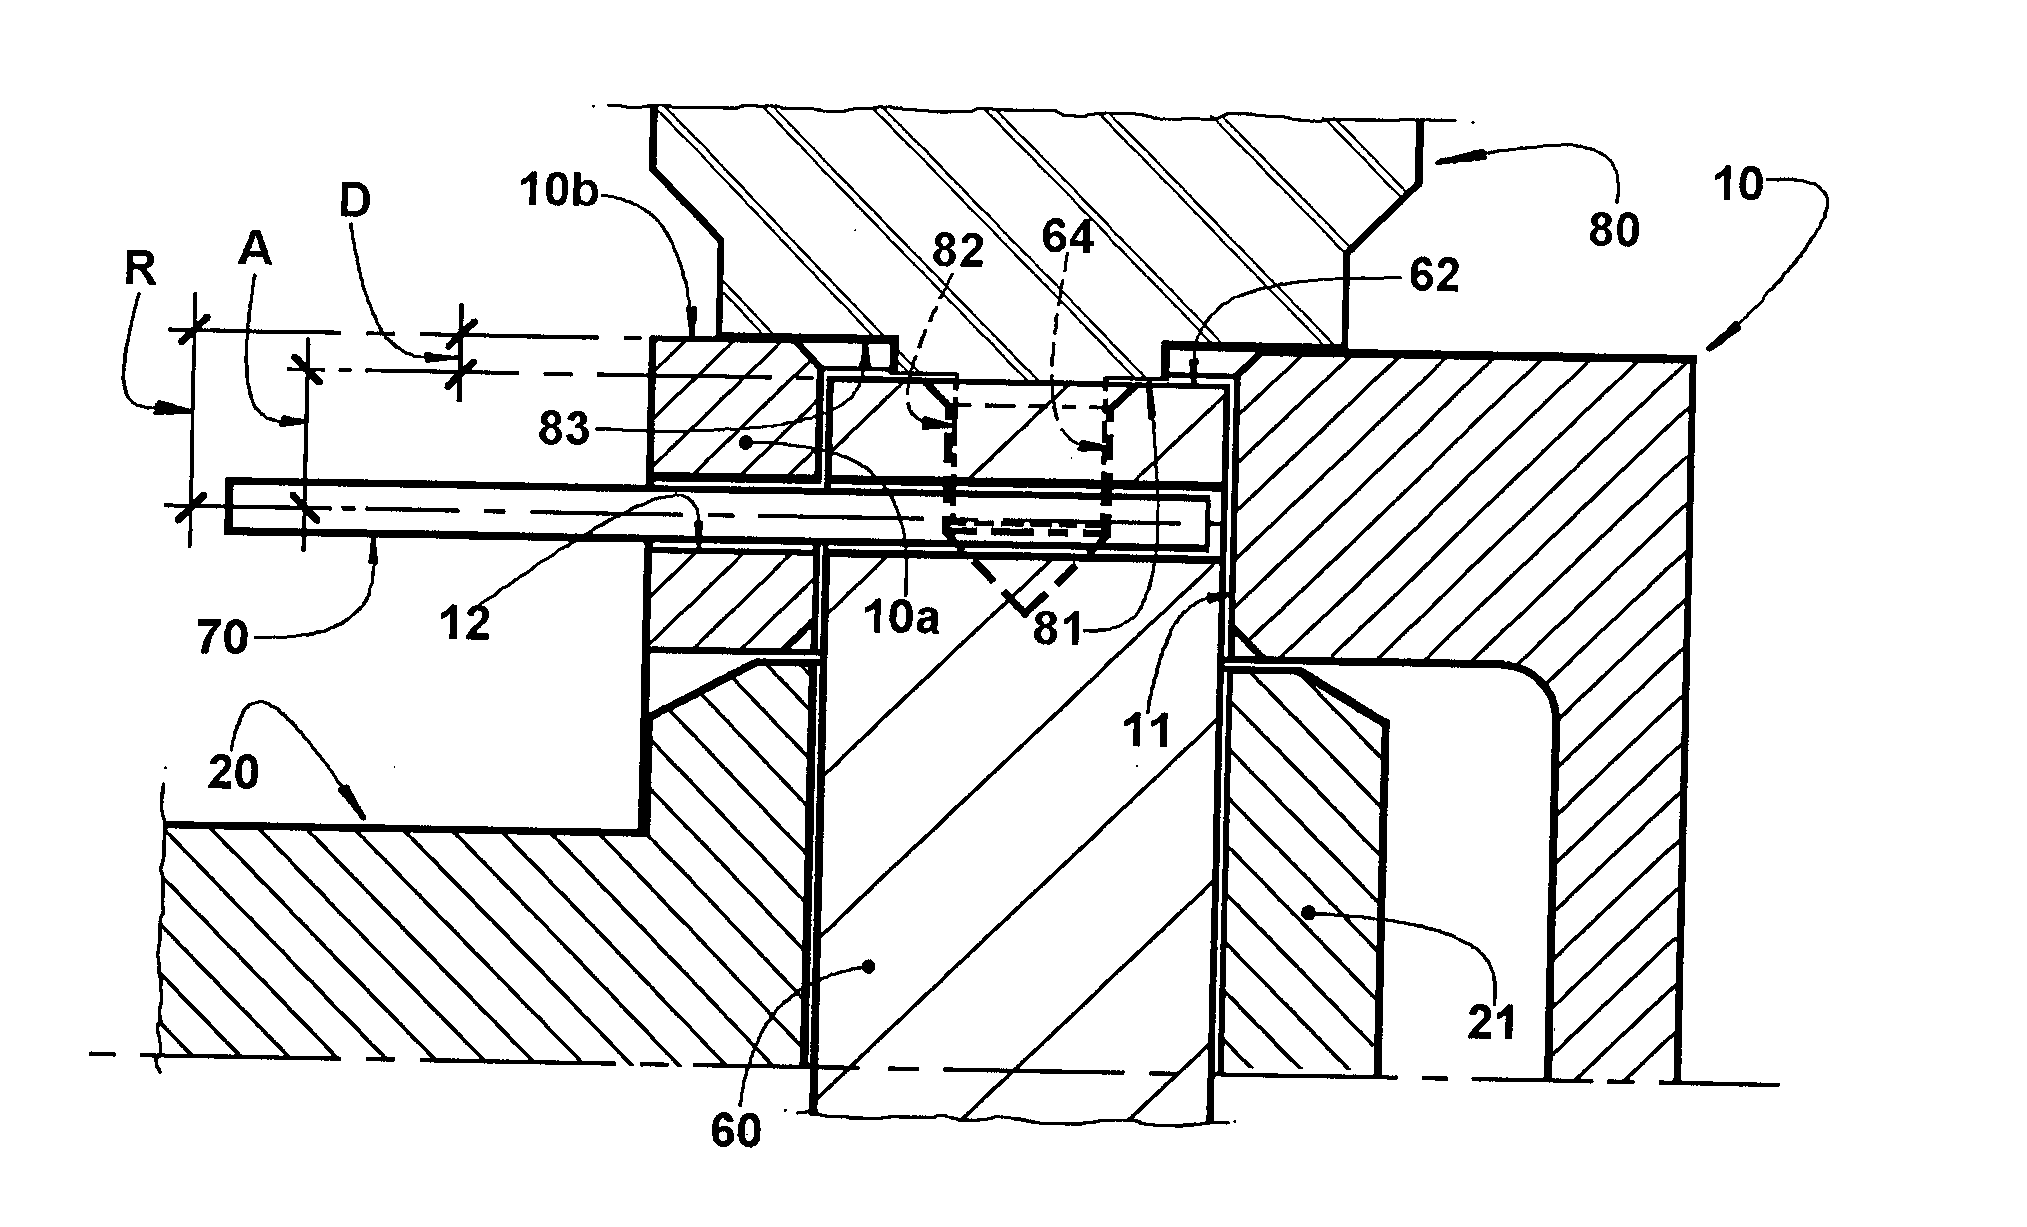 Mounting arrangement for a piston-connecting rod assembly in a refrigeration compressor